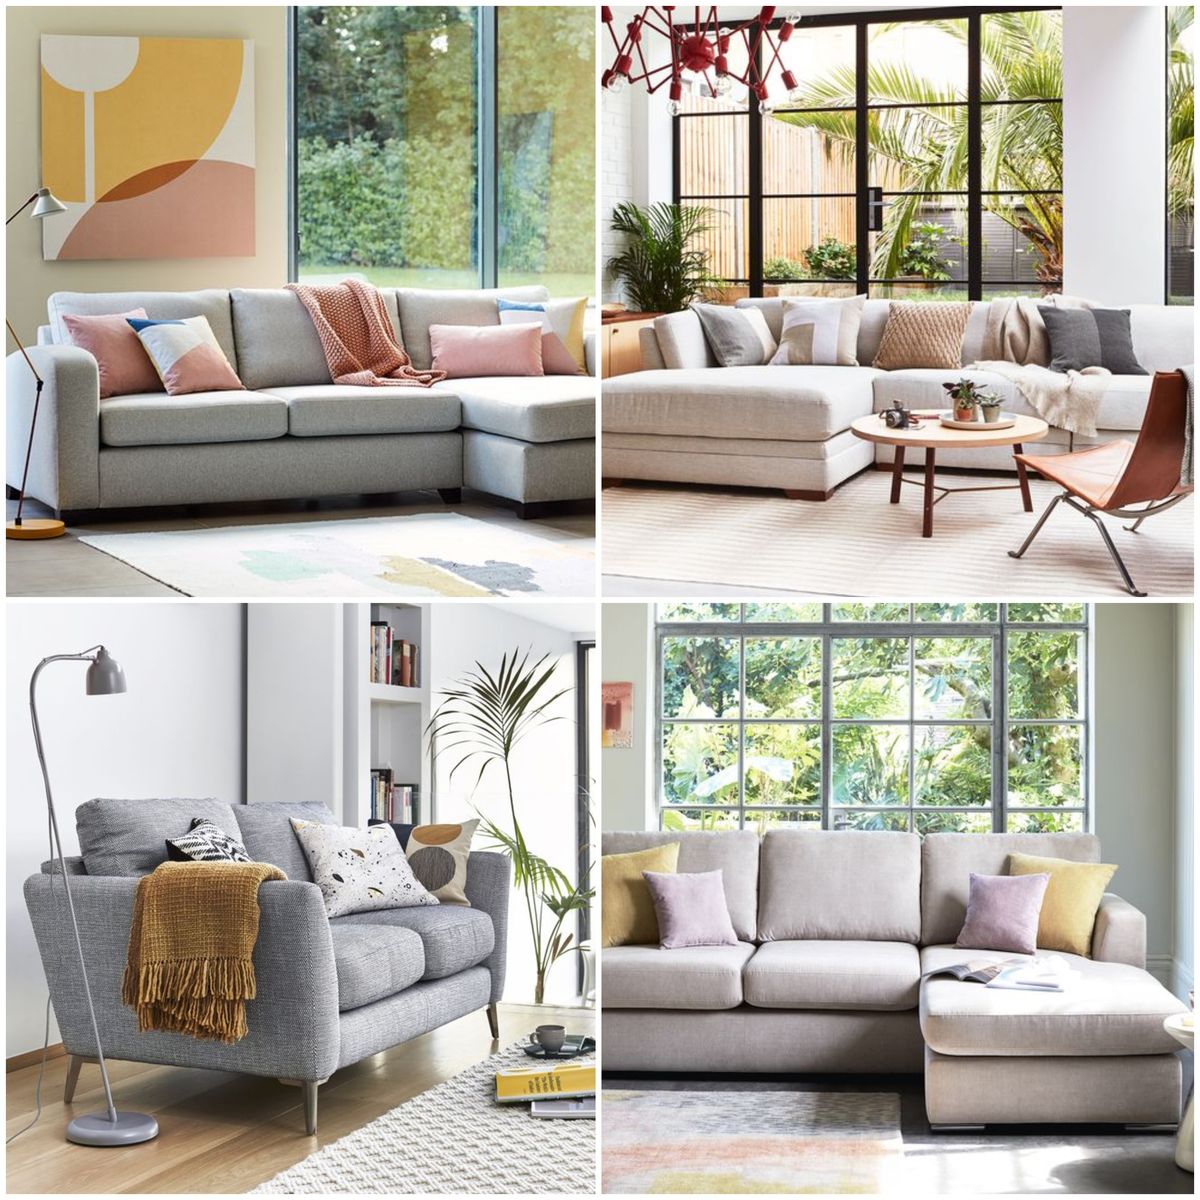 Good Housekeeping X DFS furniture range: What you need to know